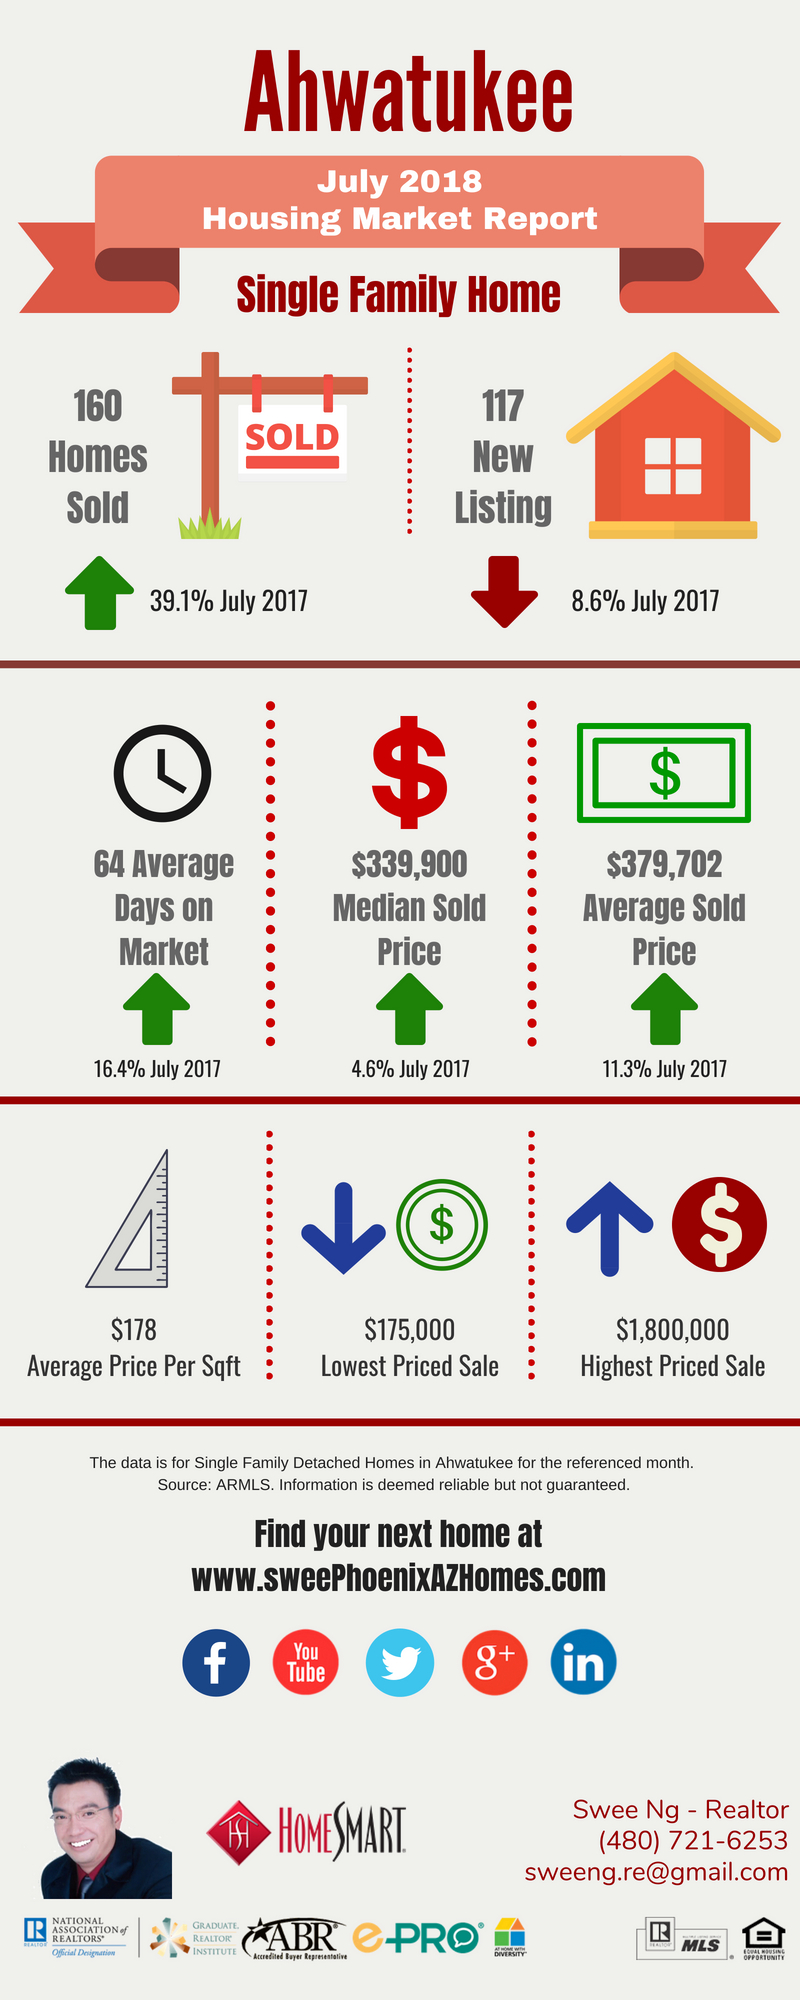 Ahwatukee Housing Market Trends Report July 2018, House Value, Real Estate and Statistic by Swee Ng